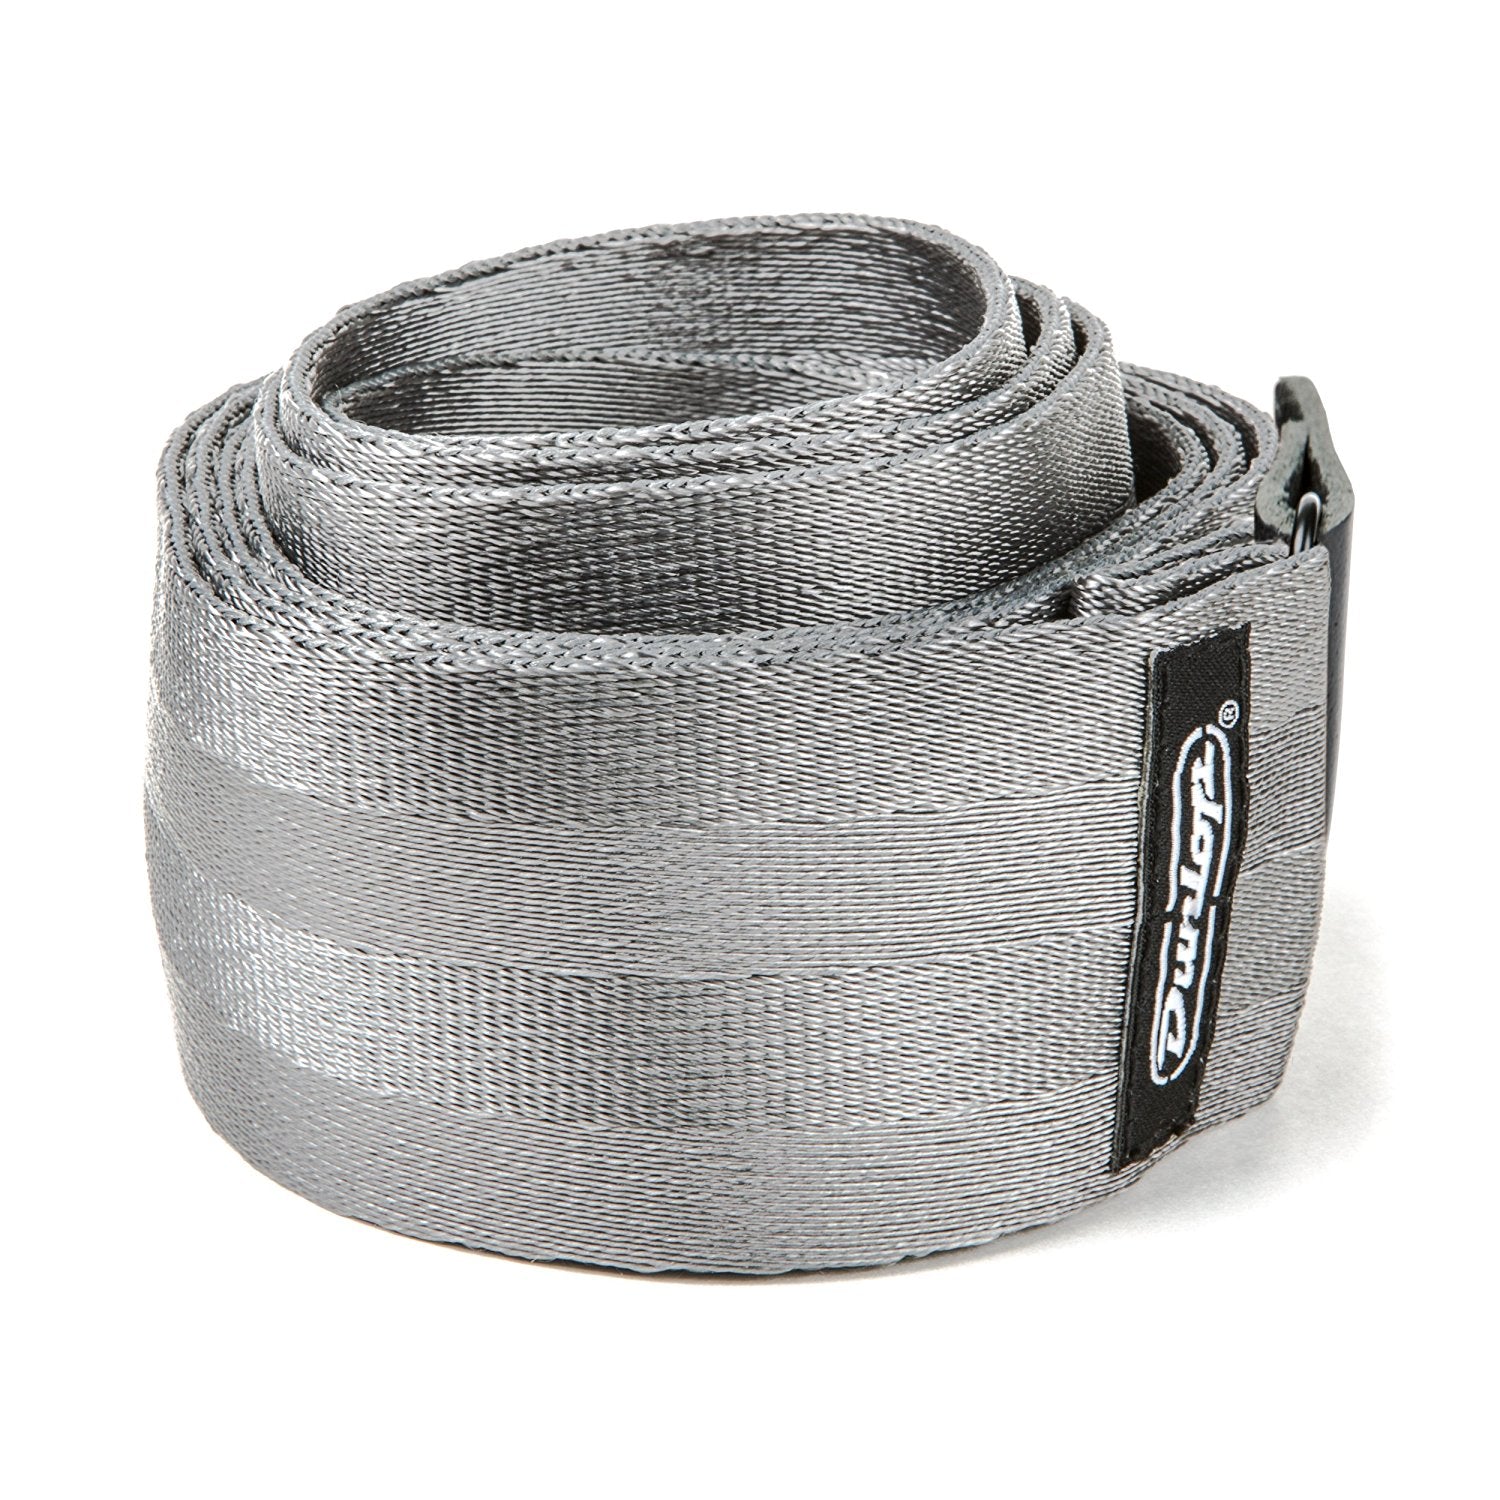 Dunlop DST7001GY Guitar Deluxe Seatbelt Strap - Grey